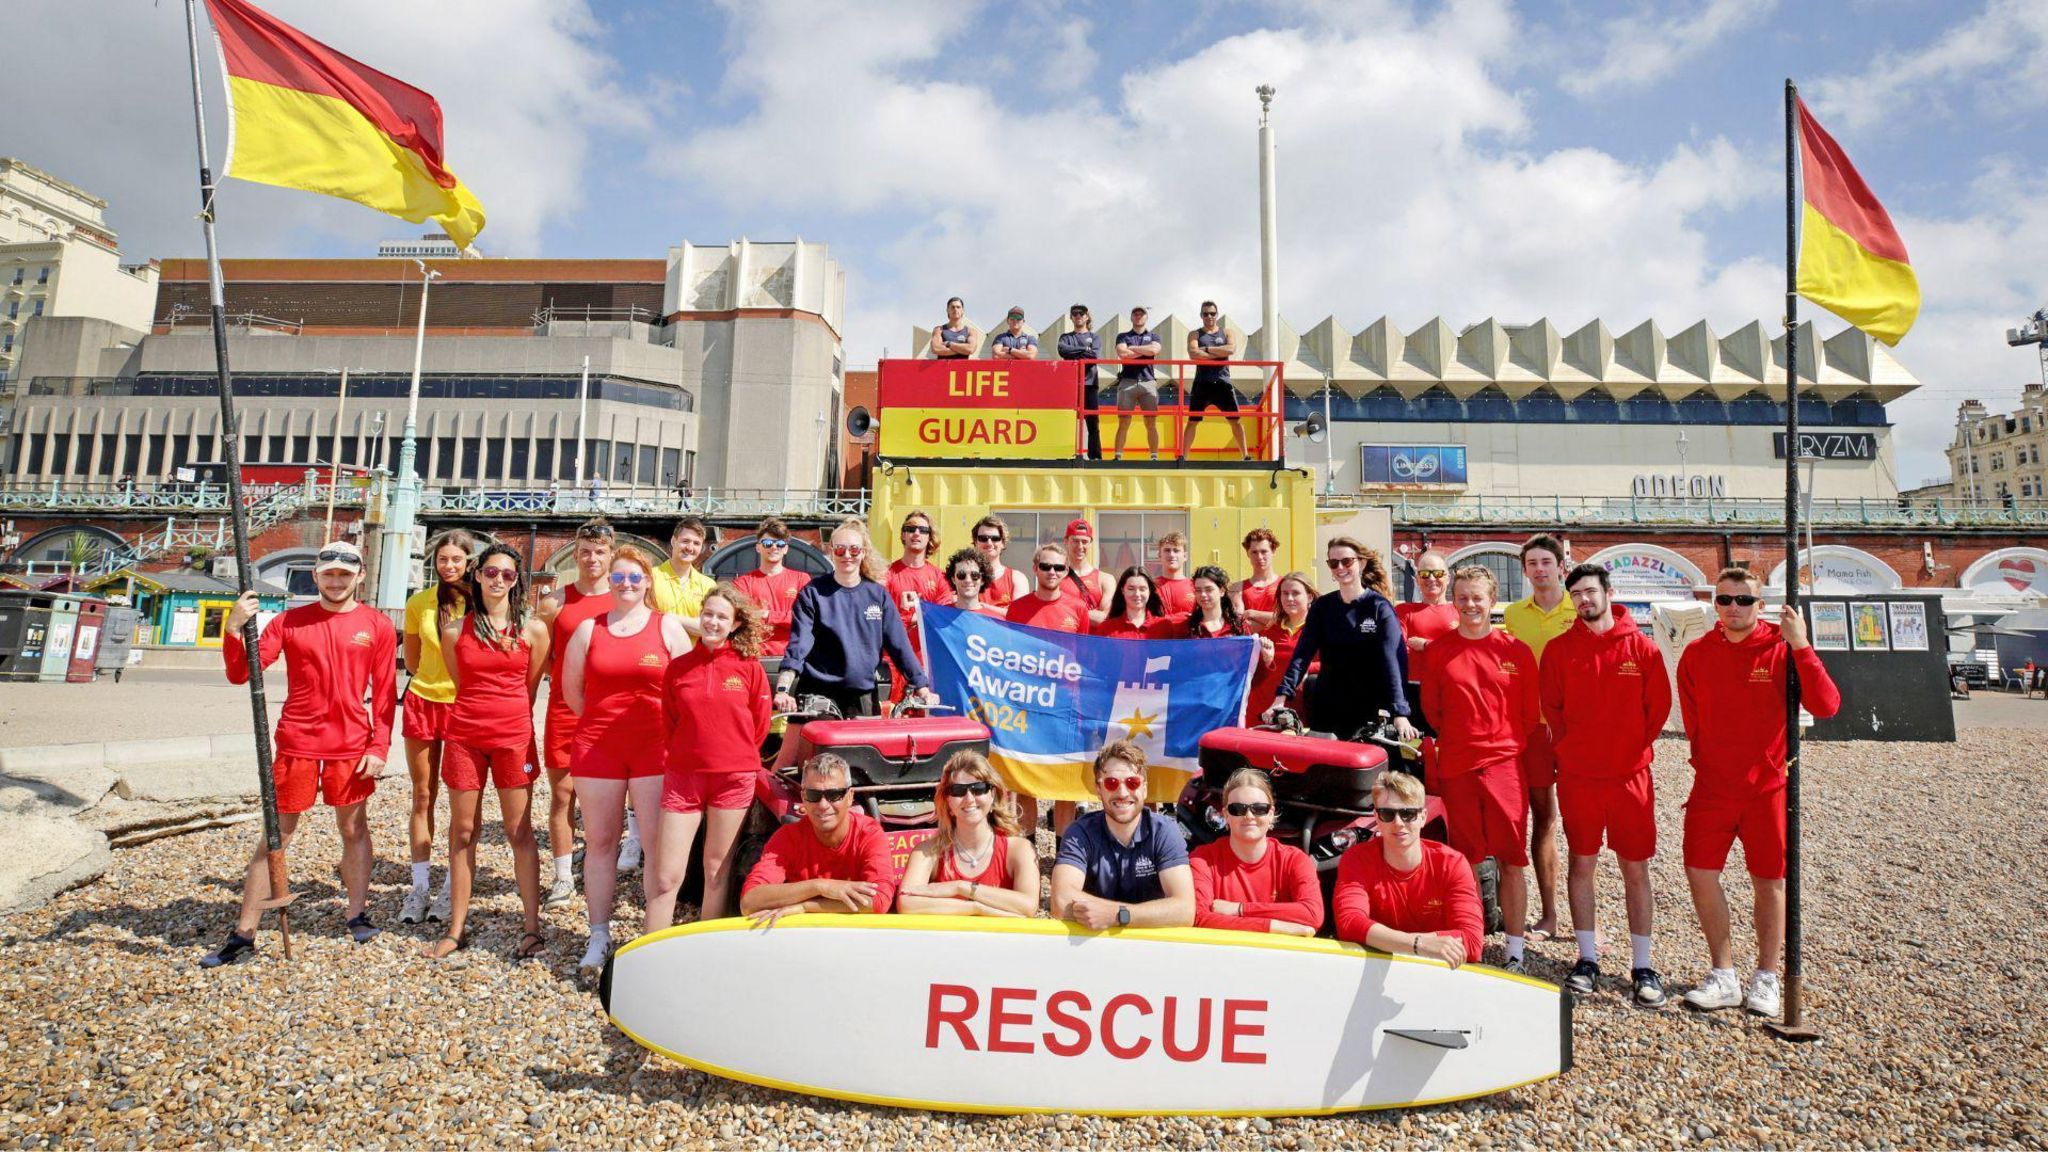 Brighton and Hove’s lifeguards stood on the beach in front of Pryzm nightclub, Brighton